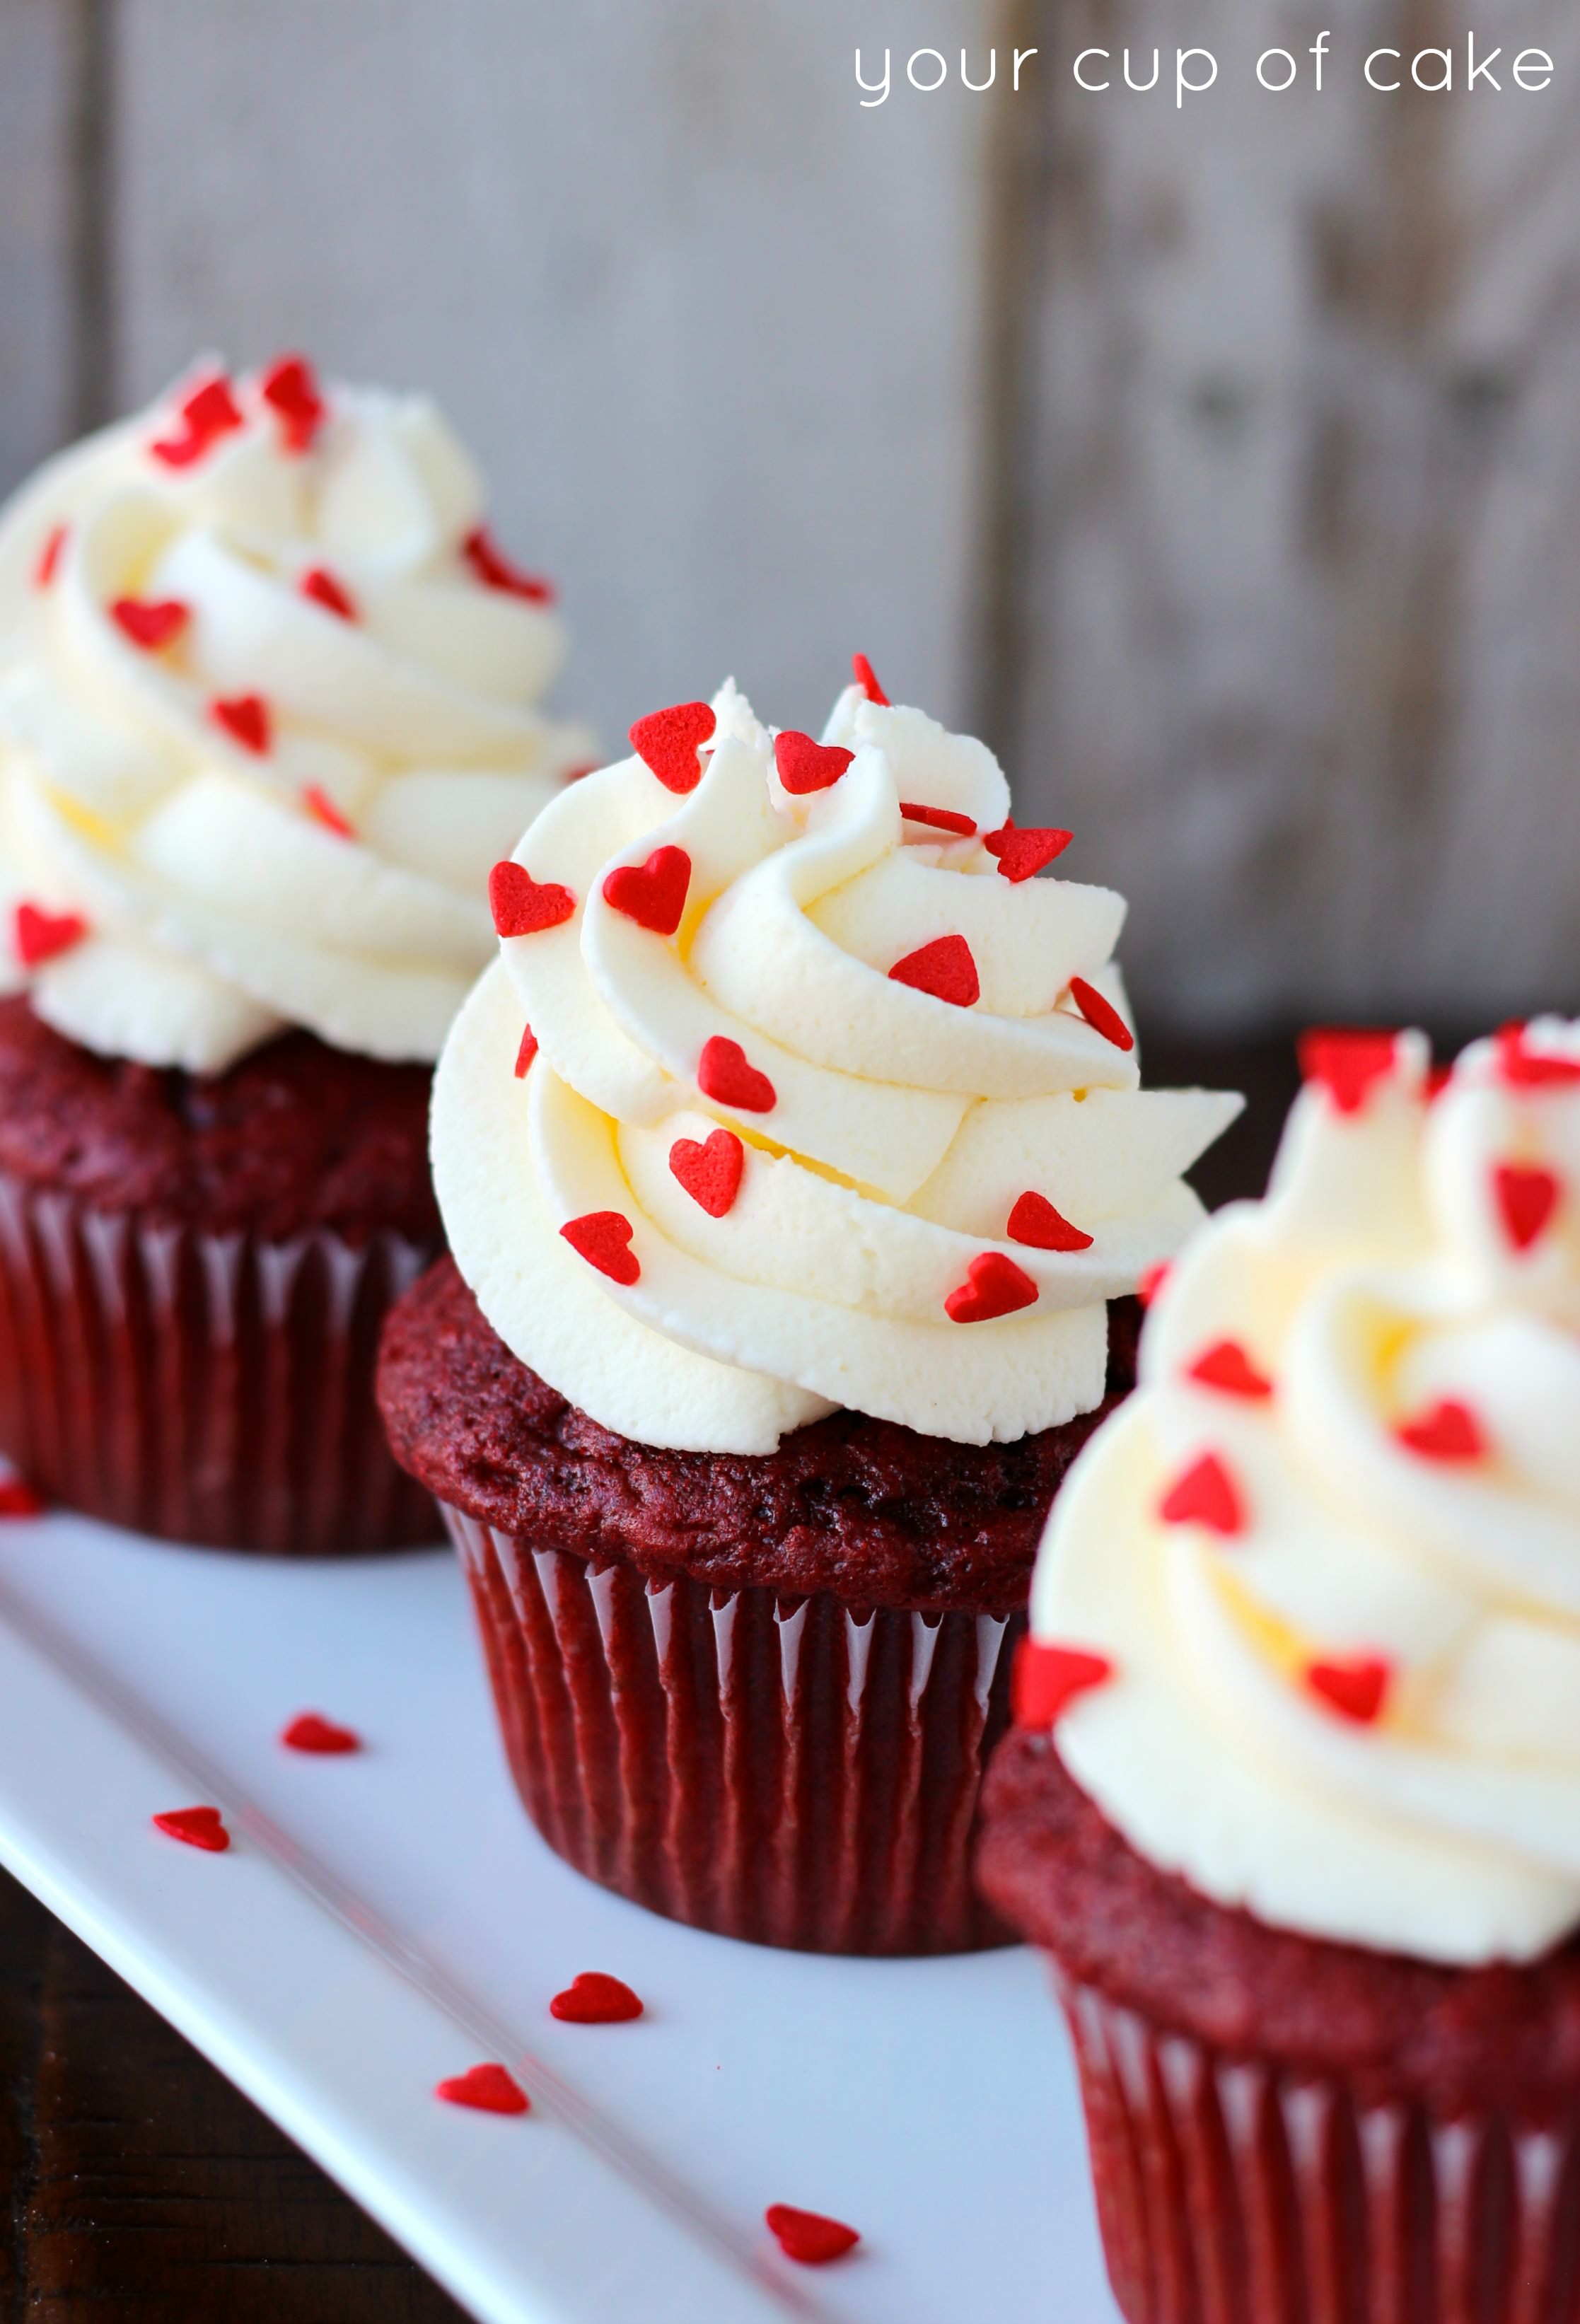 Red Velvet Cupcakes with White Chocolate Mousse - Your Cup of Cake